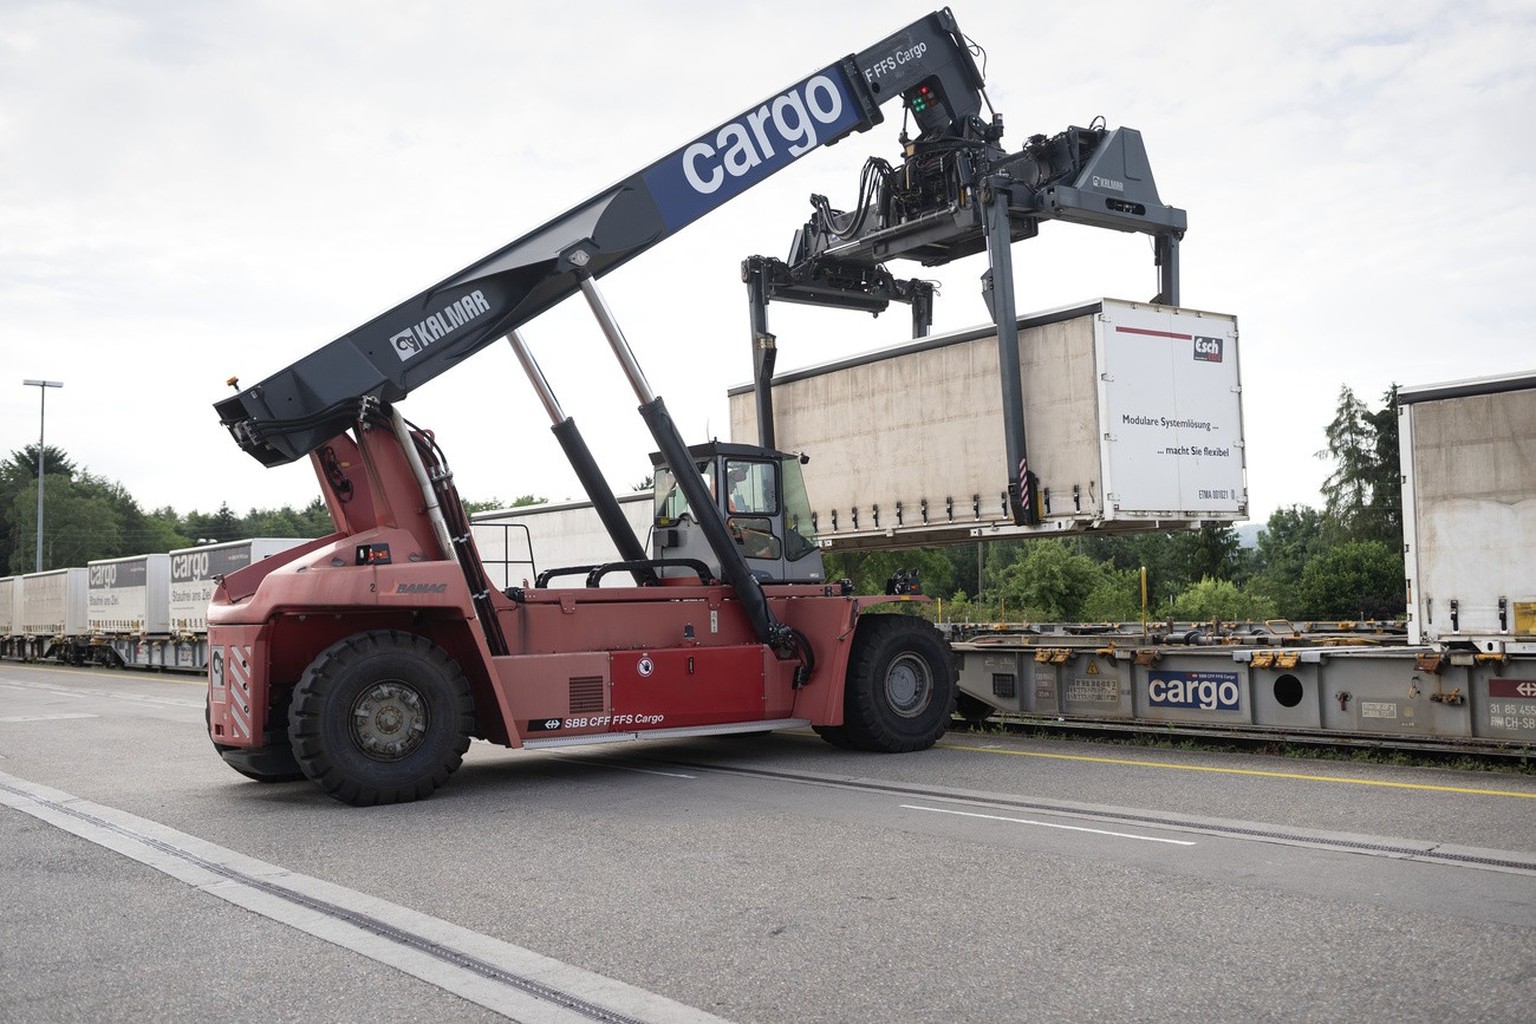 A mobile crane is used to unload containers from trucks onto the railway at the transhipment terminal of Swiss Federal Railways Cargo in Dietikon, Switzerland, on June 21, 2019. (KEYSTONE/Gaetan Bally ...